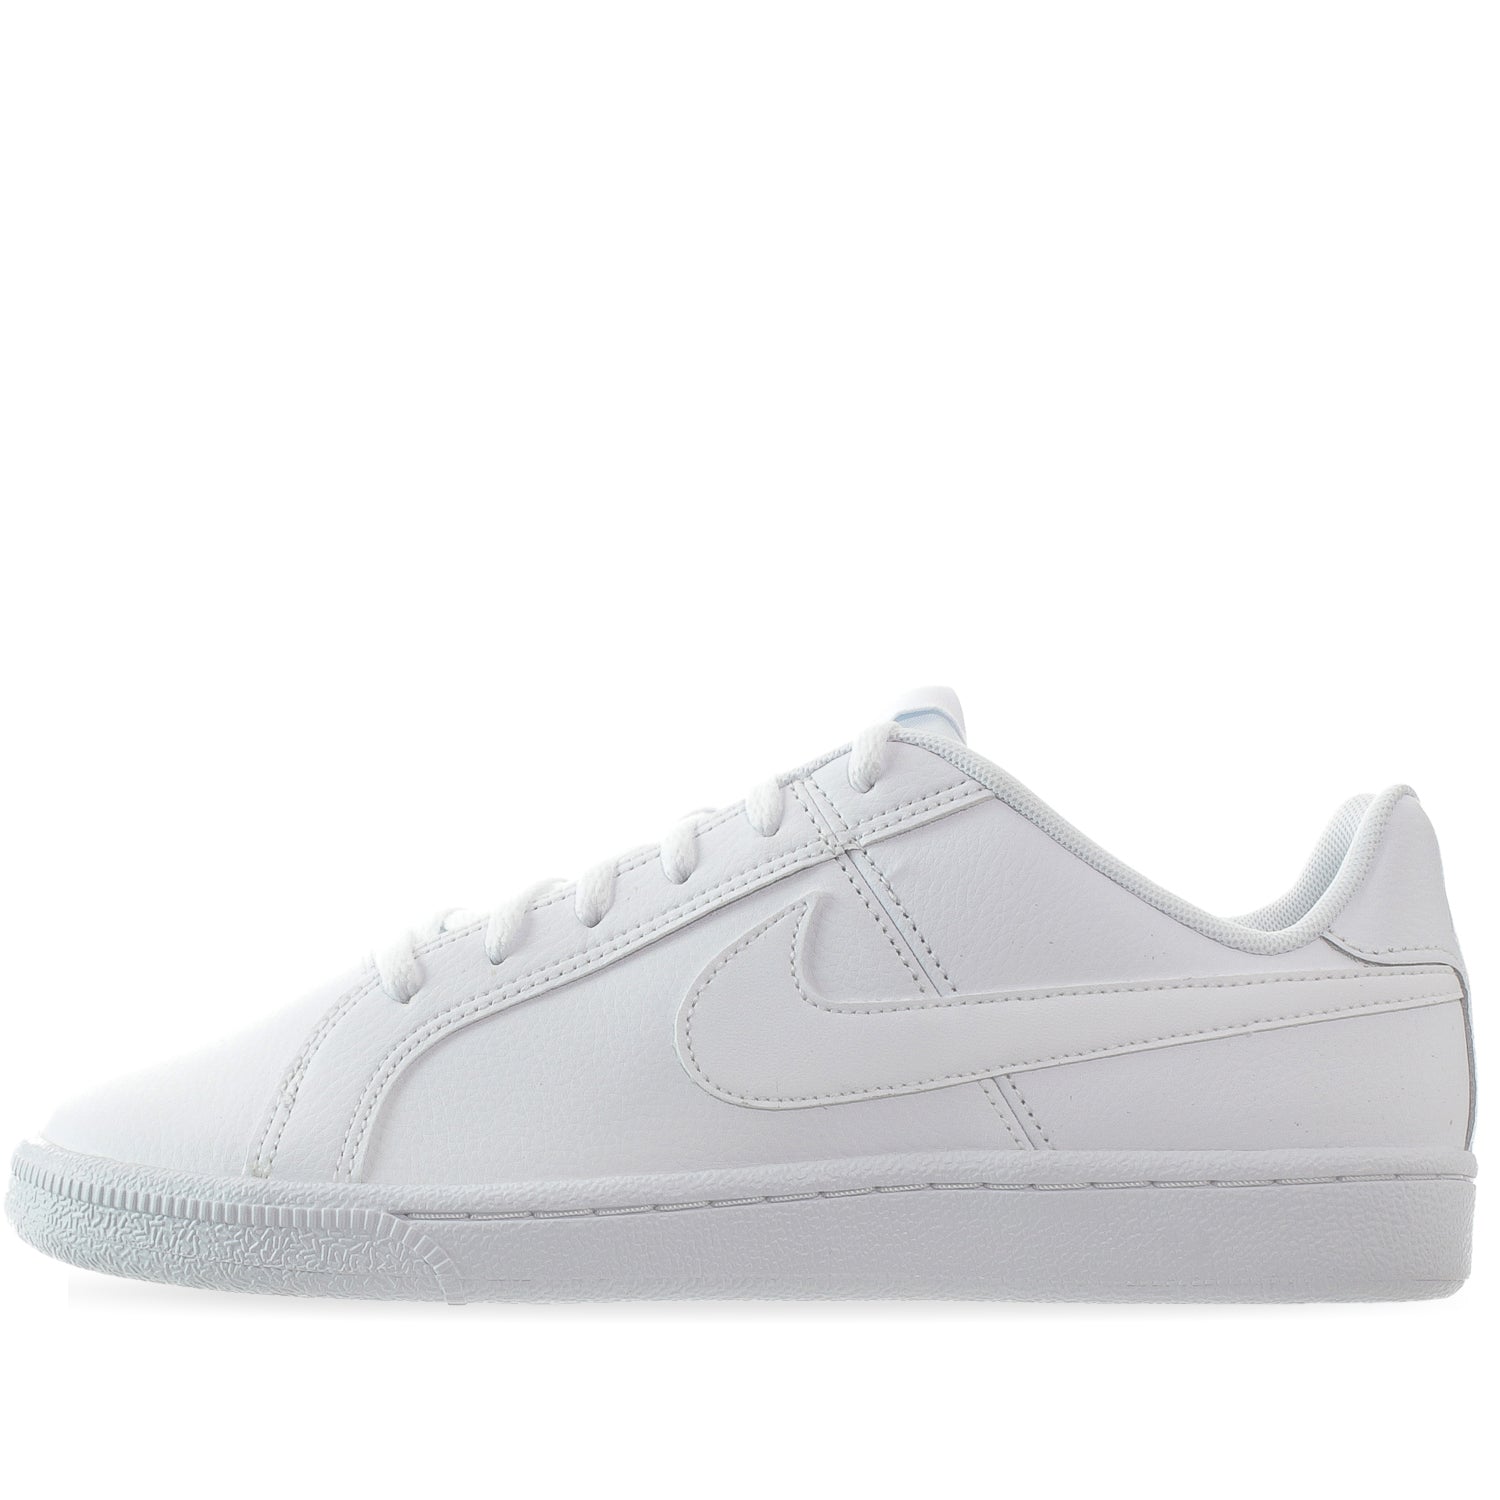 court royale gs nike